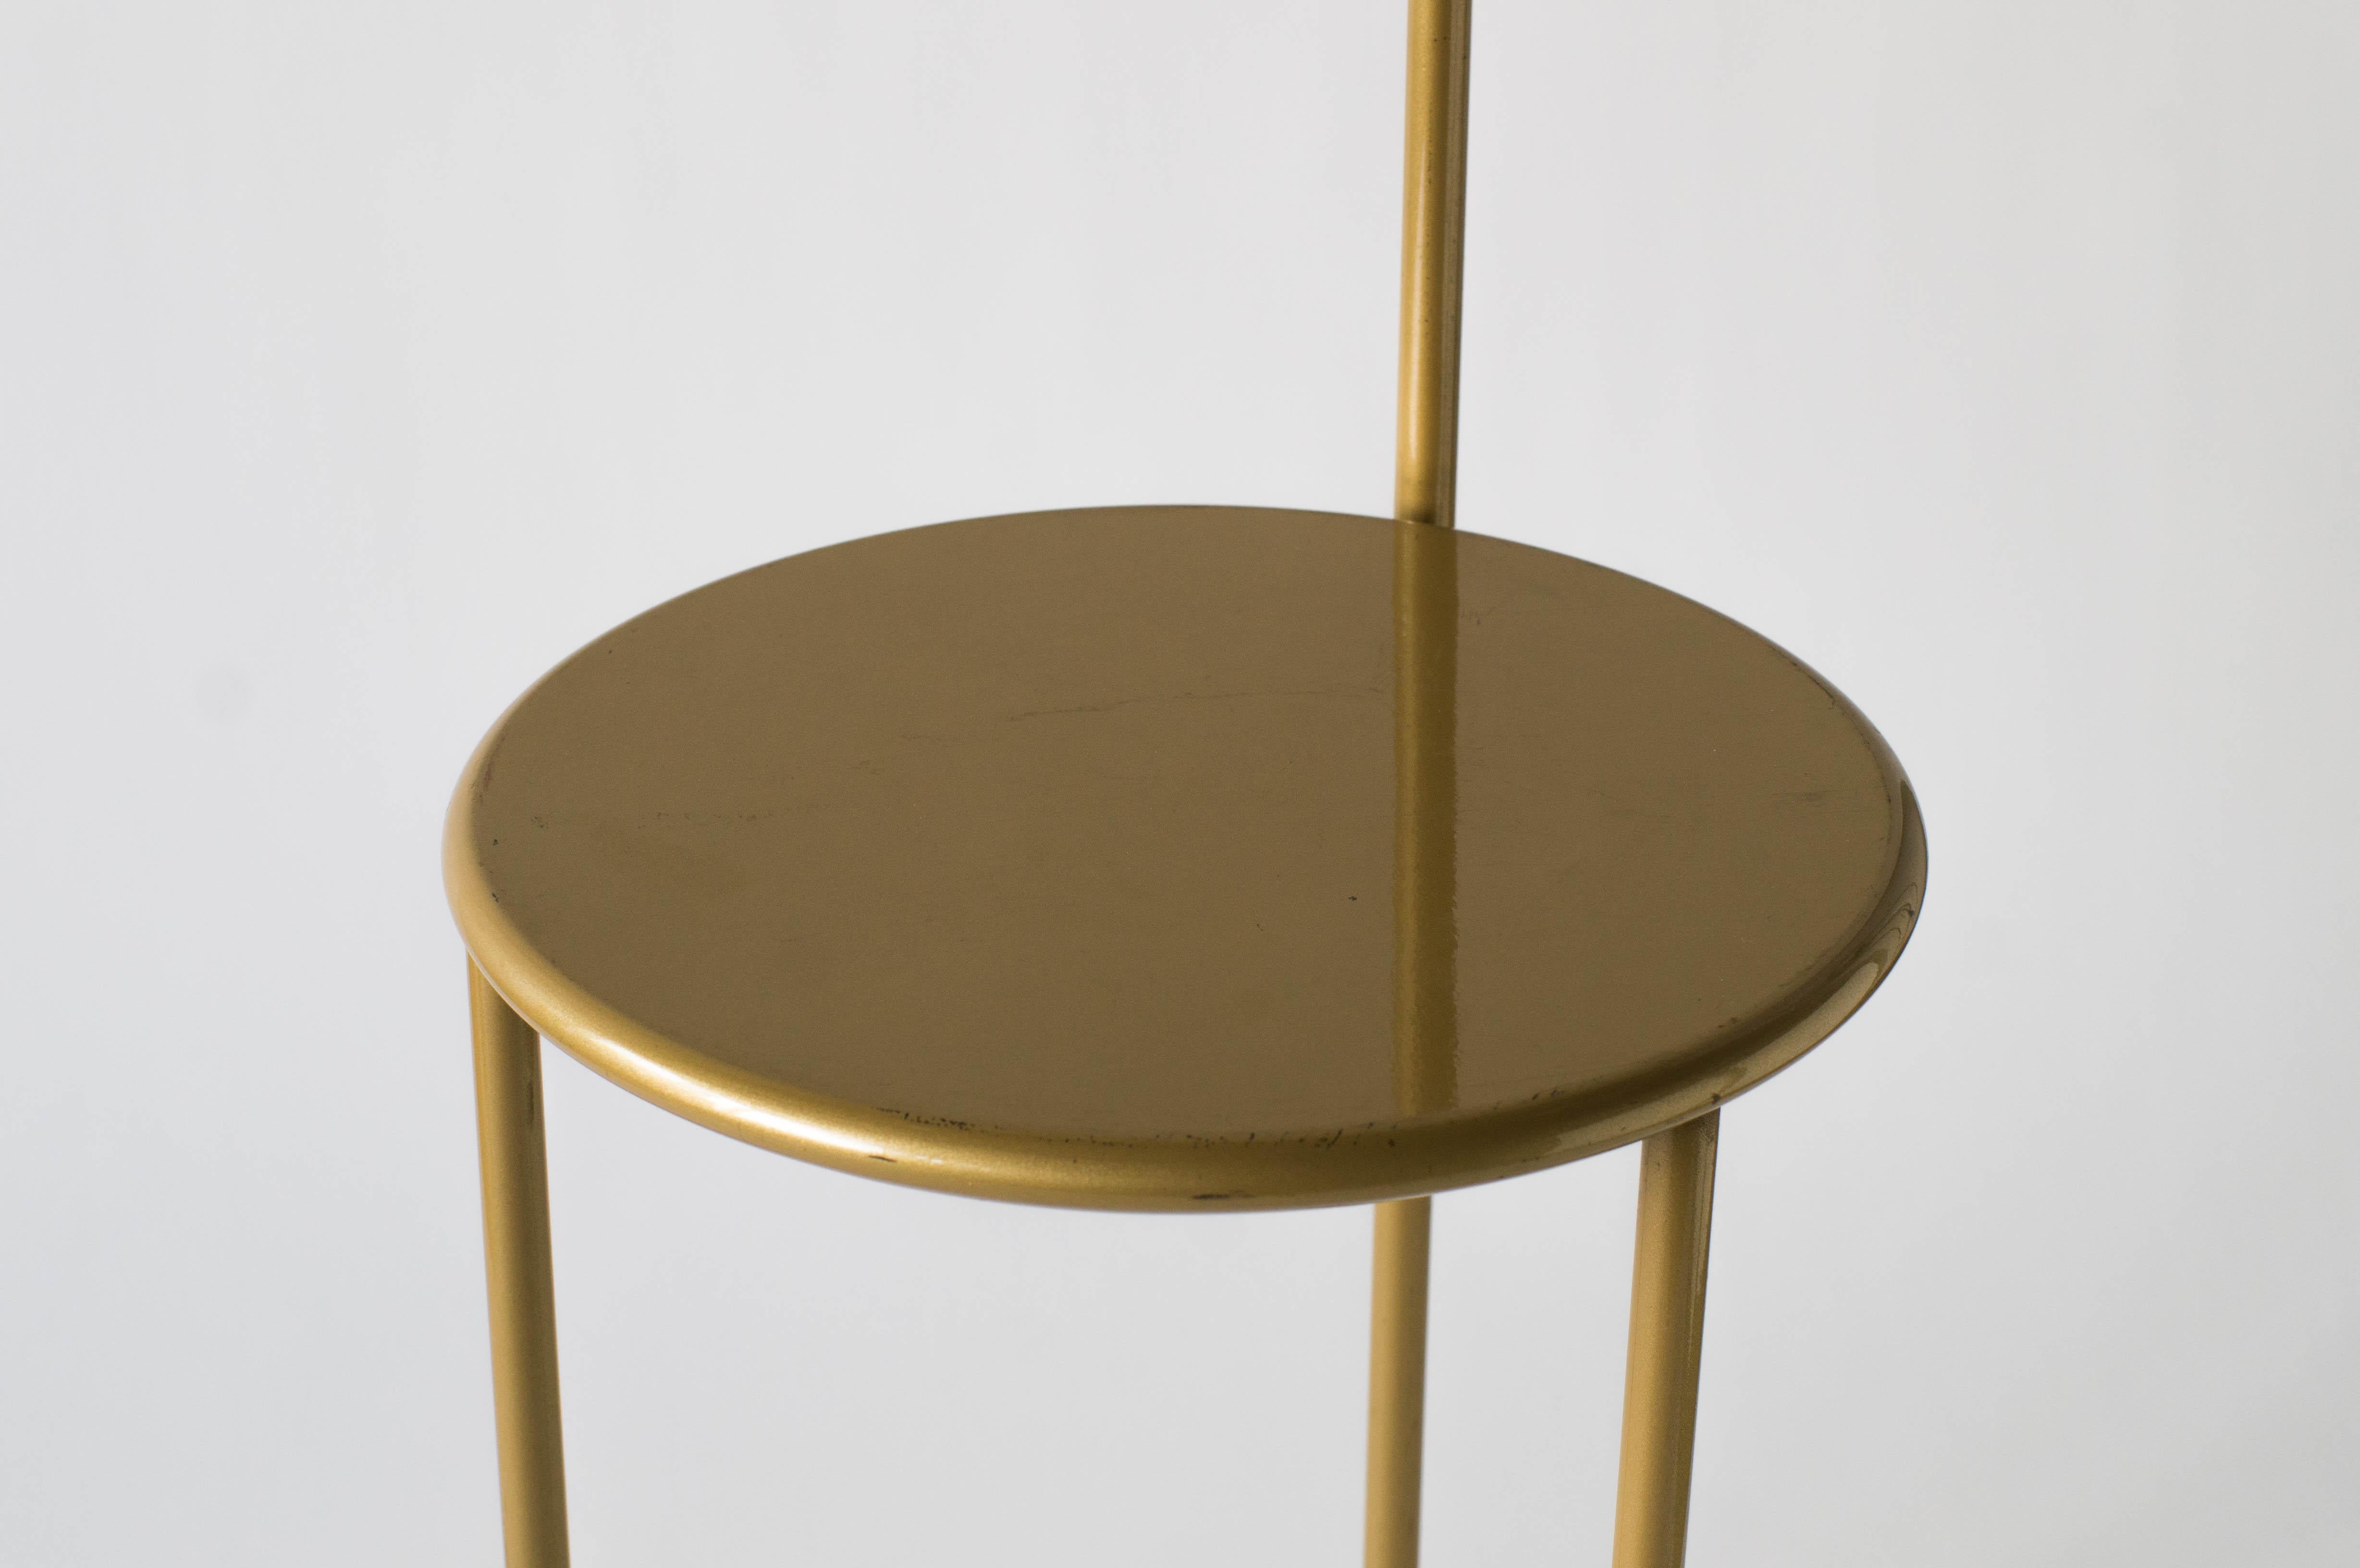 Painted Mickville Philippe Starck Driade Aleph Gold